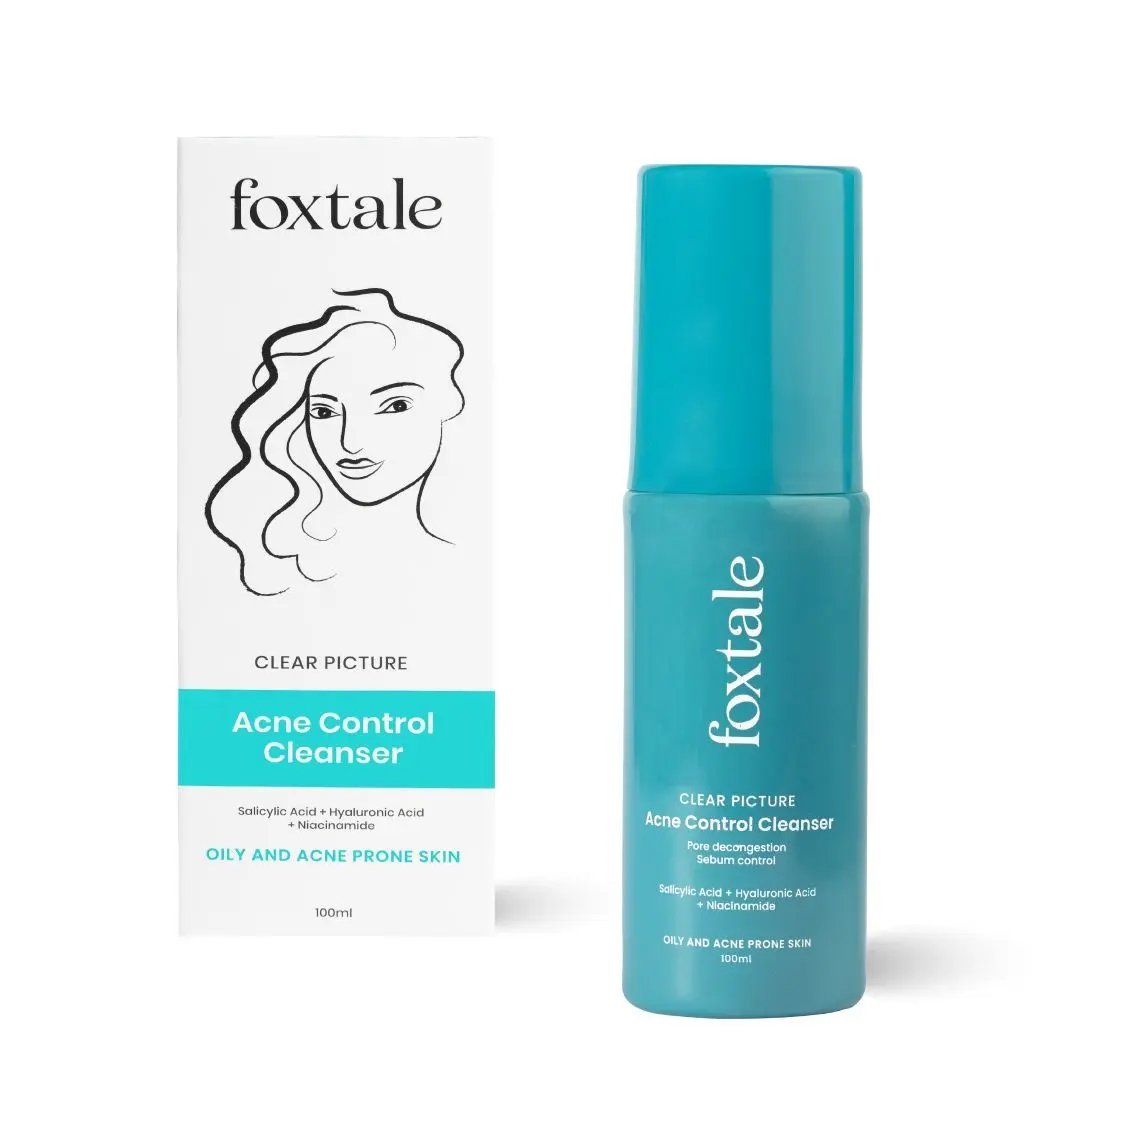 Foxtale Clear Picture Acne Control Cleanser for Oily and Acne Prone Skin | With Salicylic Acid and Niacinamide | Anti-Acne Face Wash for Pimples | Unisex - 100 ML